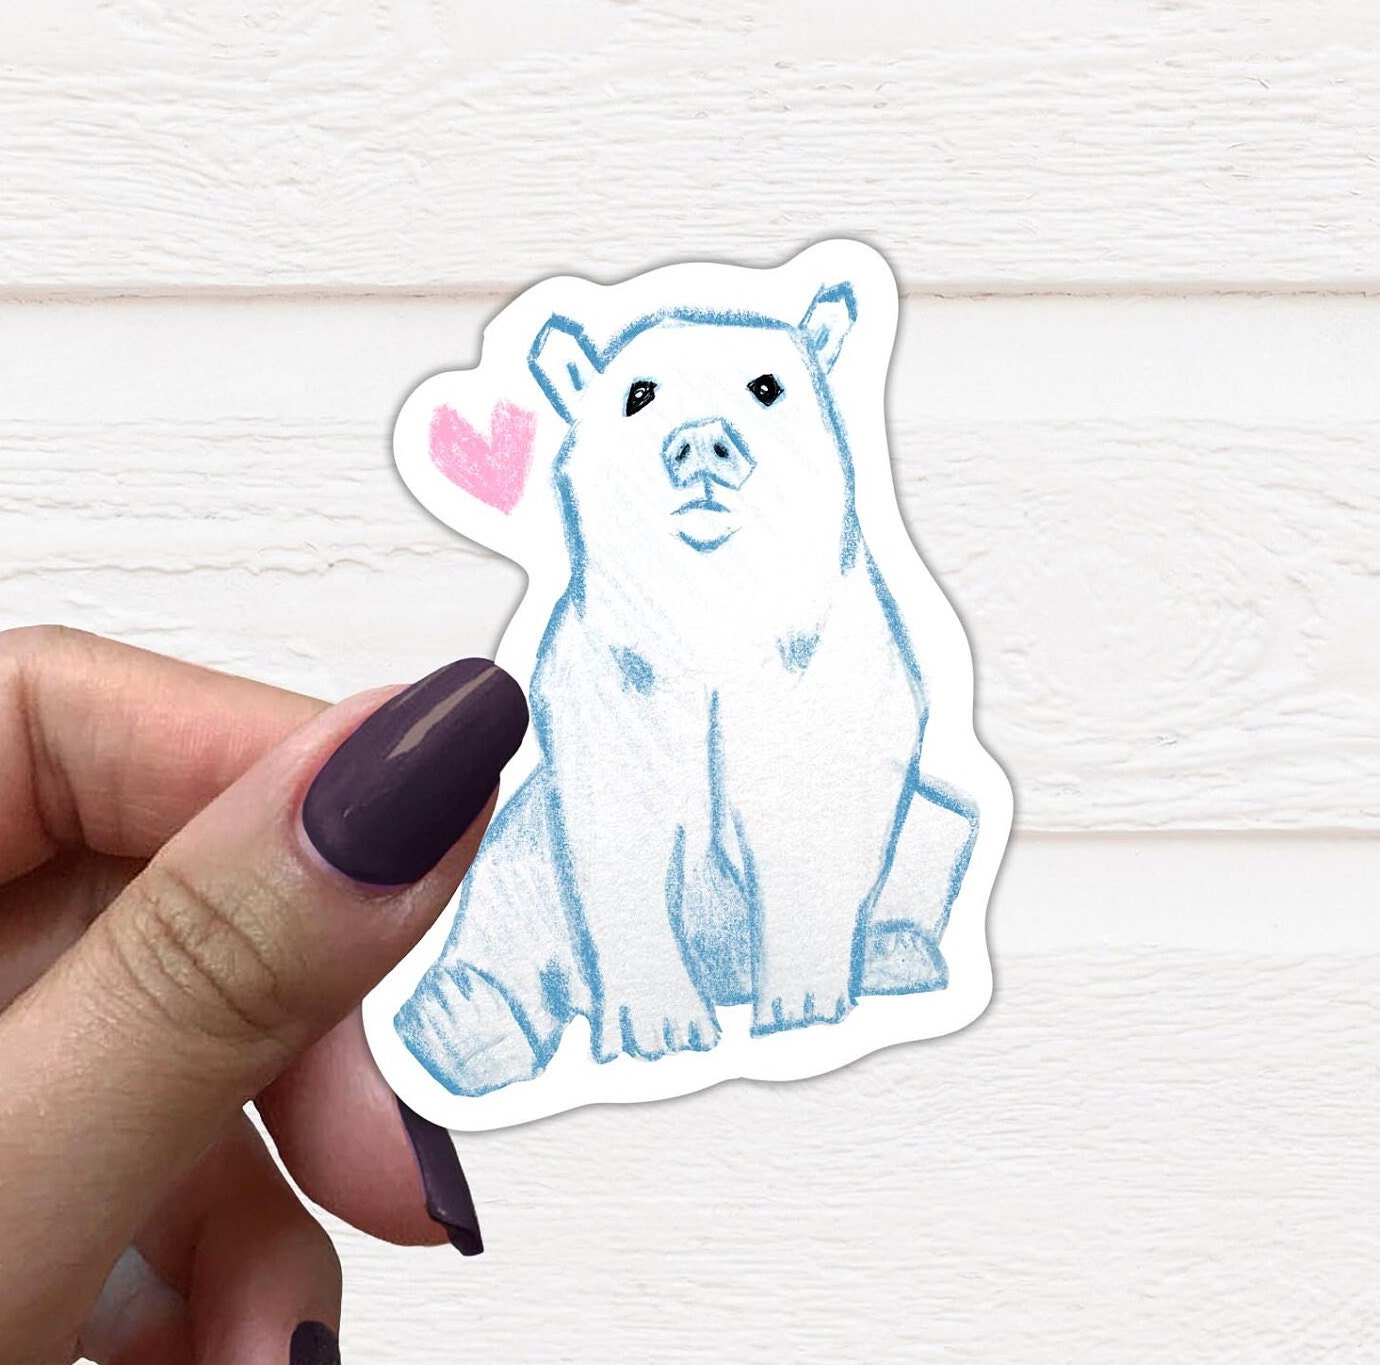 Polar Bear Sticker, Animal Stickers, Die Cut Label, Water Bottle Label,  Notebook Decal, Laptop Stickers, Tumbler Decal, Water Proof Decal 